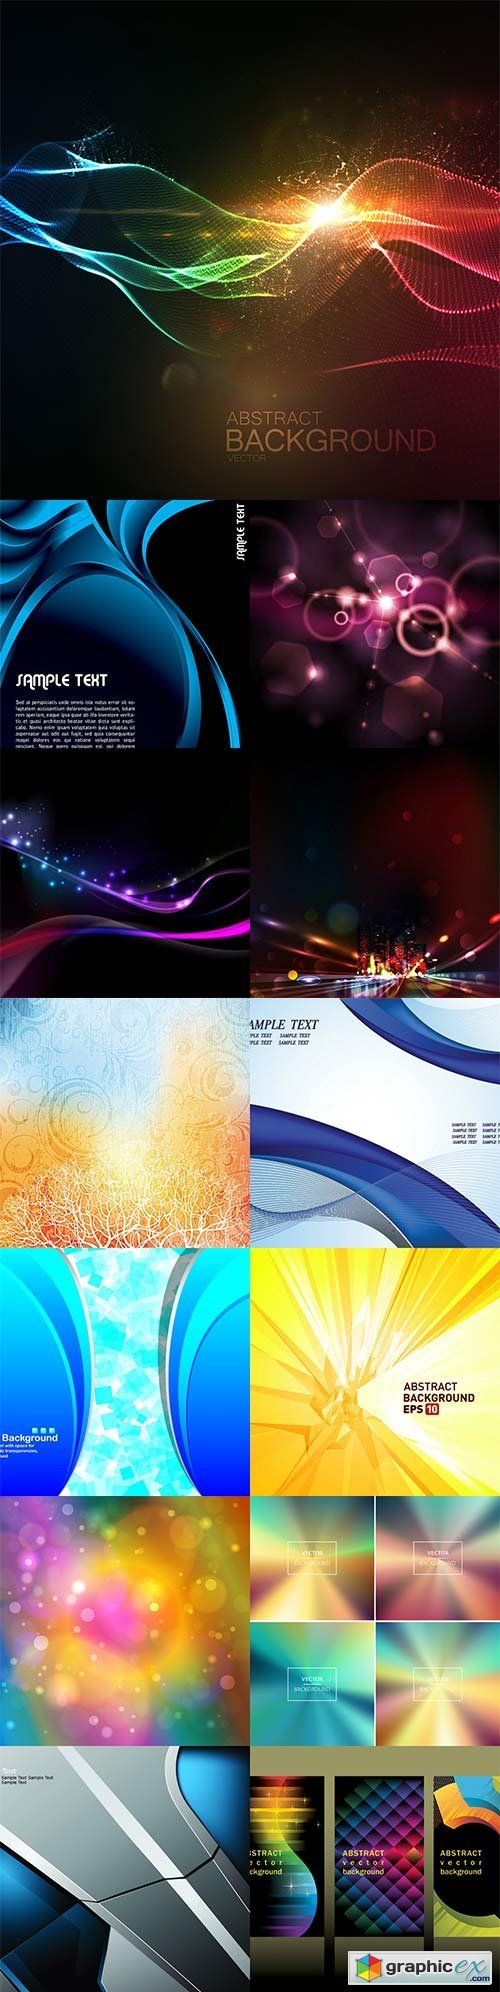 Bright colorful abstract backgrounds vector -47